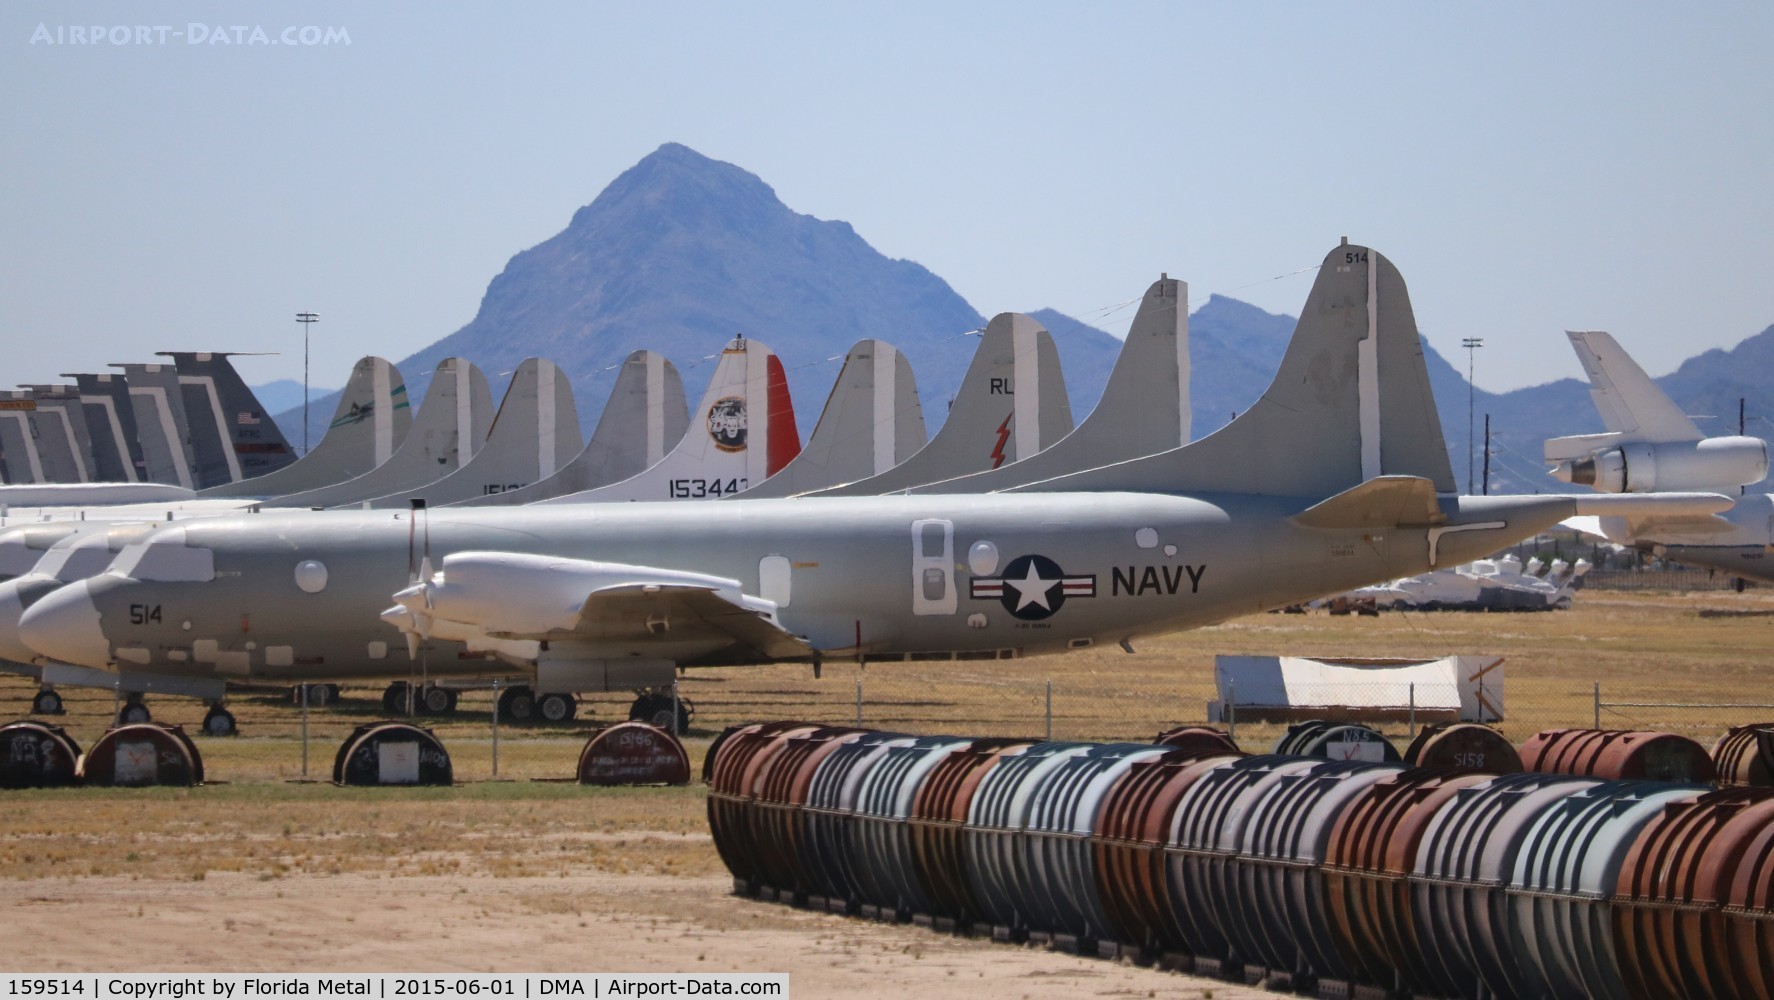 159514, Lockheed P-3C Orion C/N 285A-5632, P-3C Orion